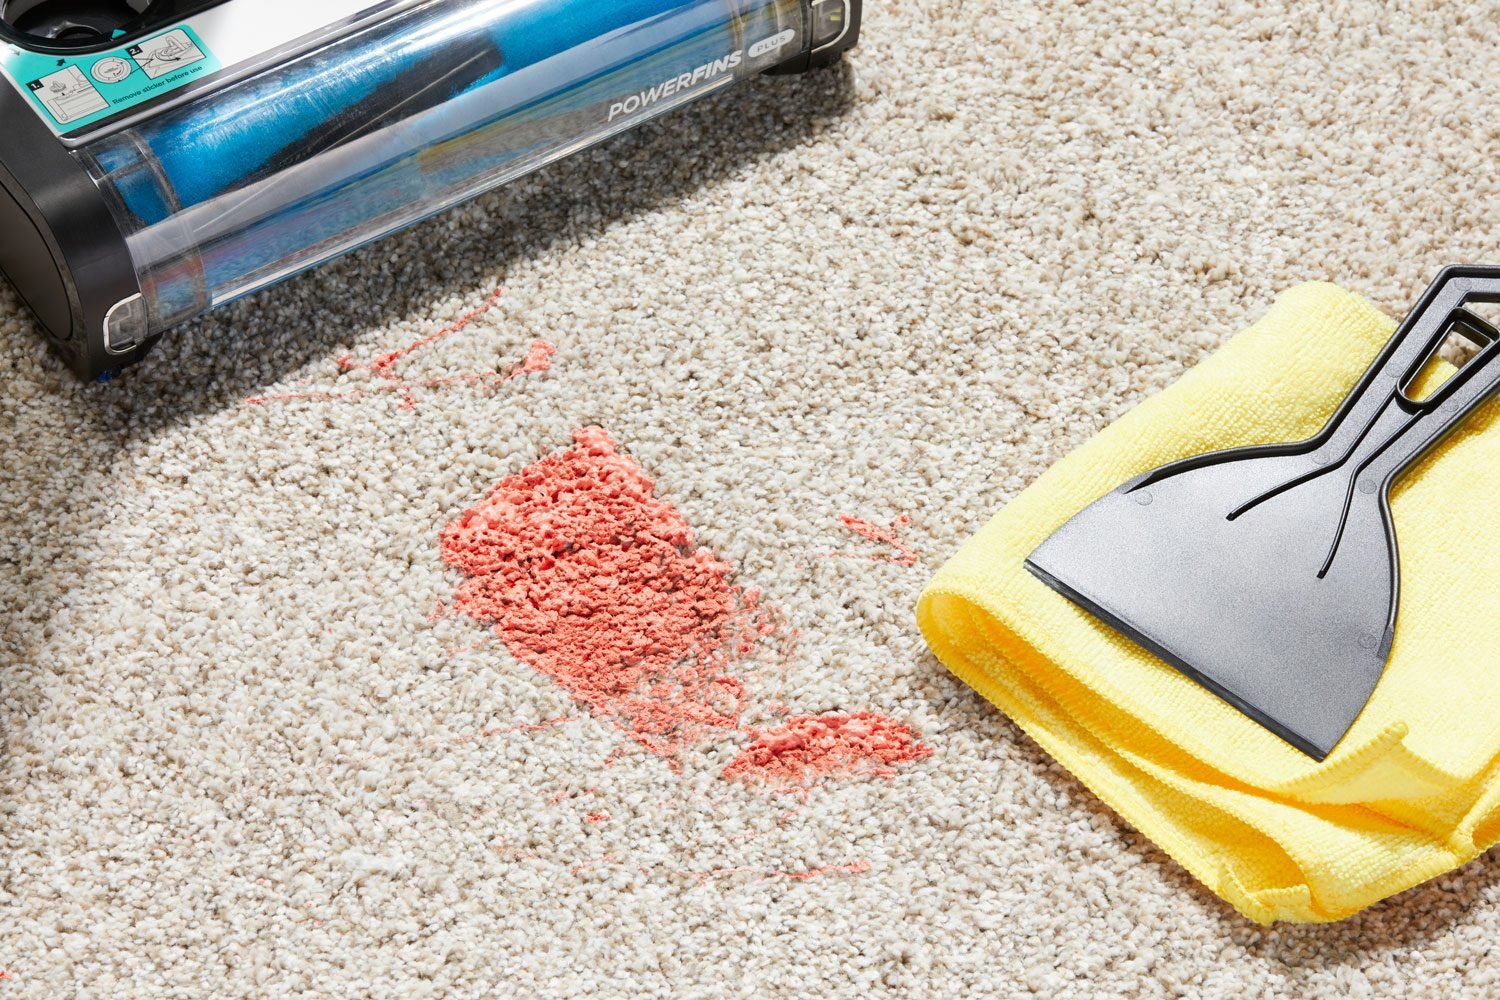 Dried paint stain on a carpet with paint scraper, towel, and vacuum cleaner nearby